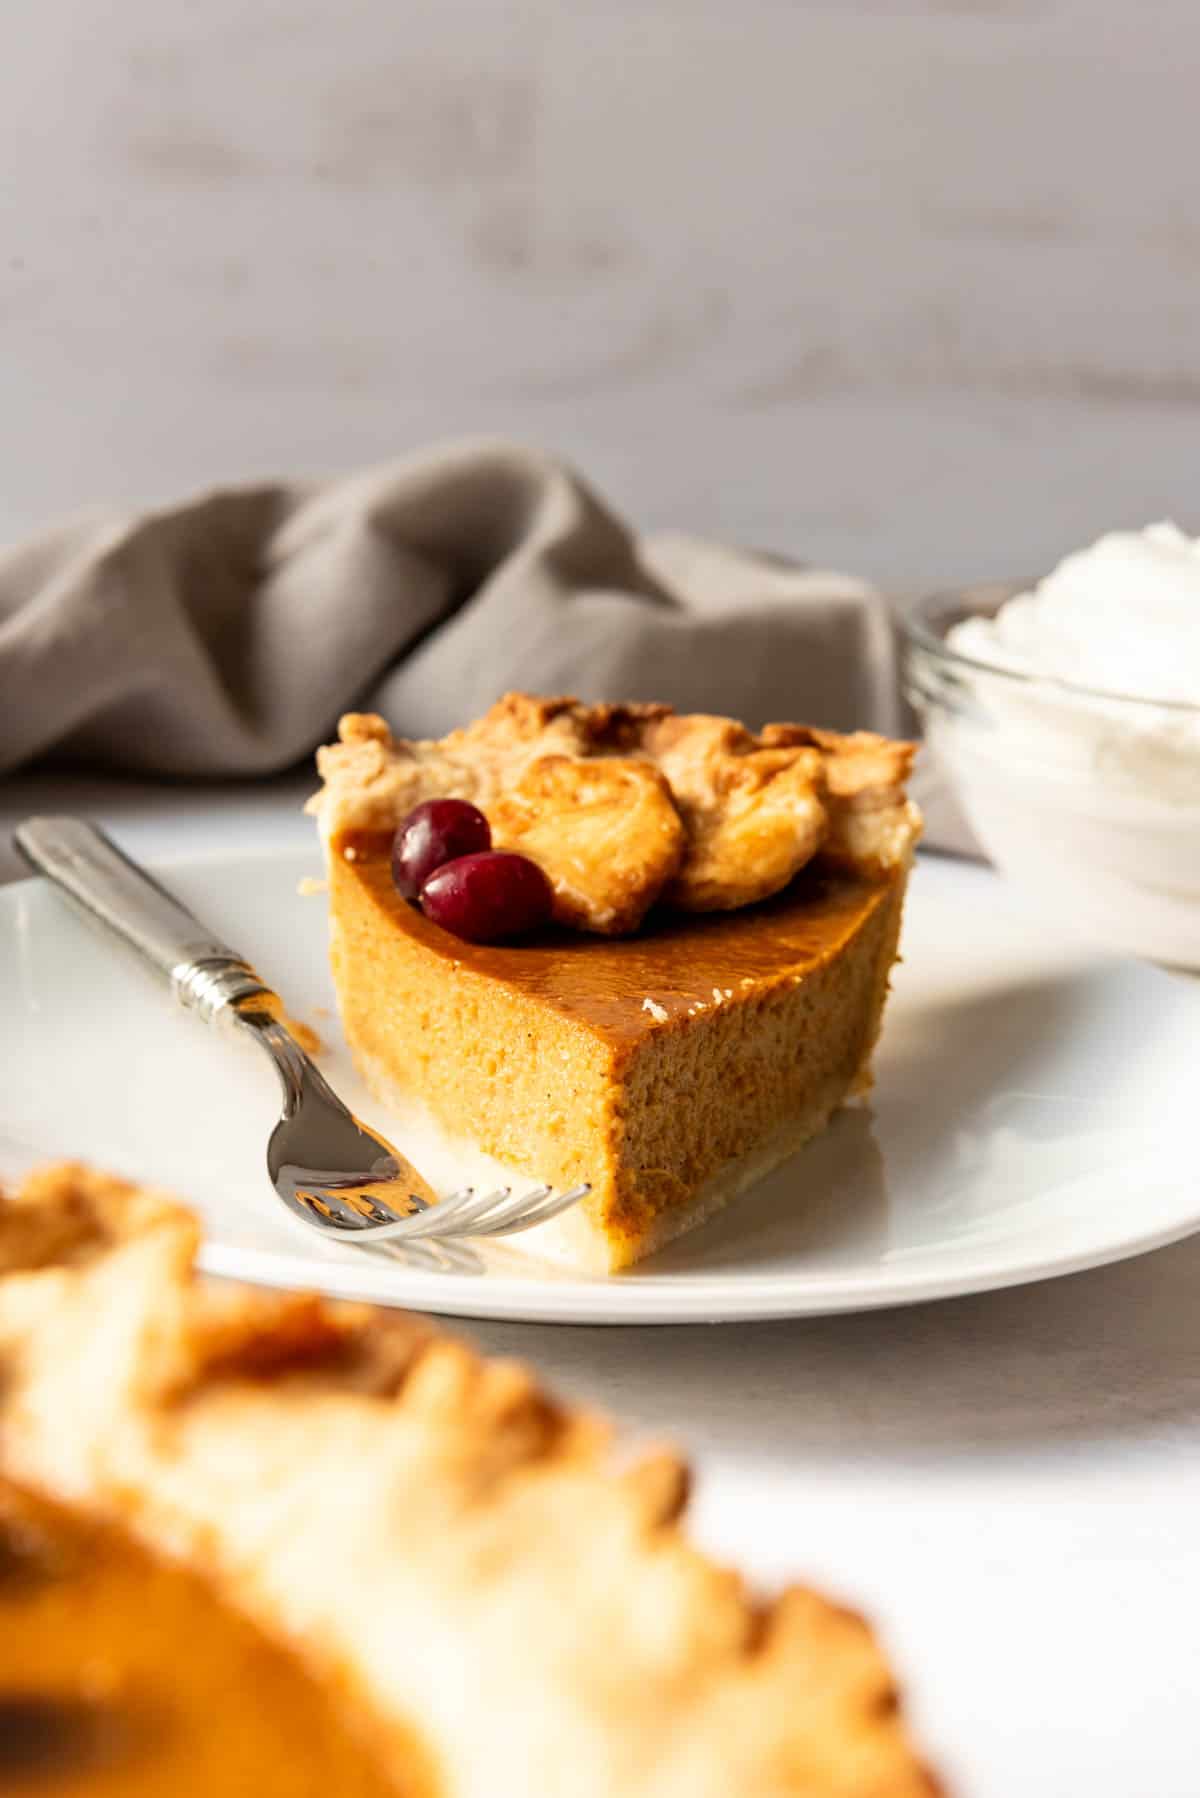 An image of a slice of pumpkin pie on a plate with a fork.